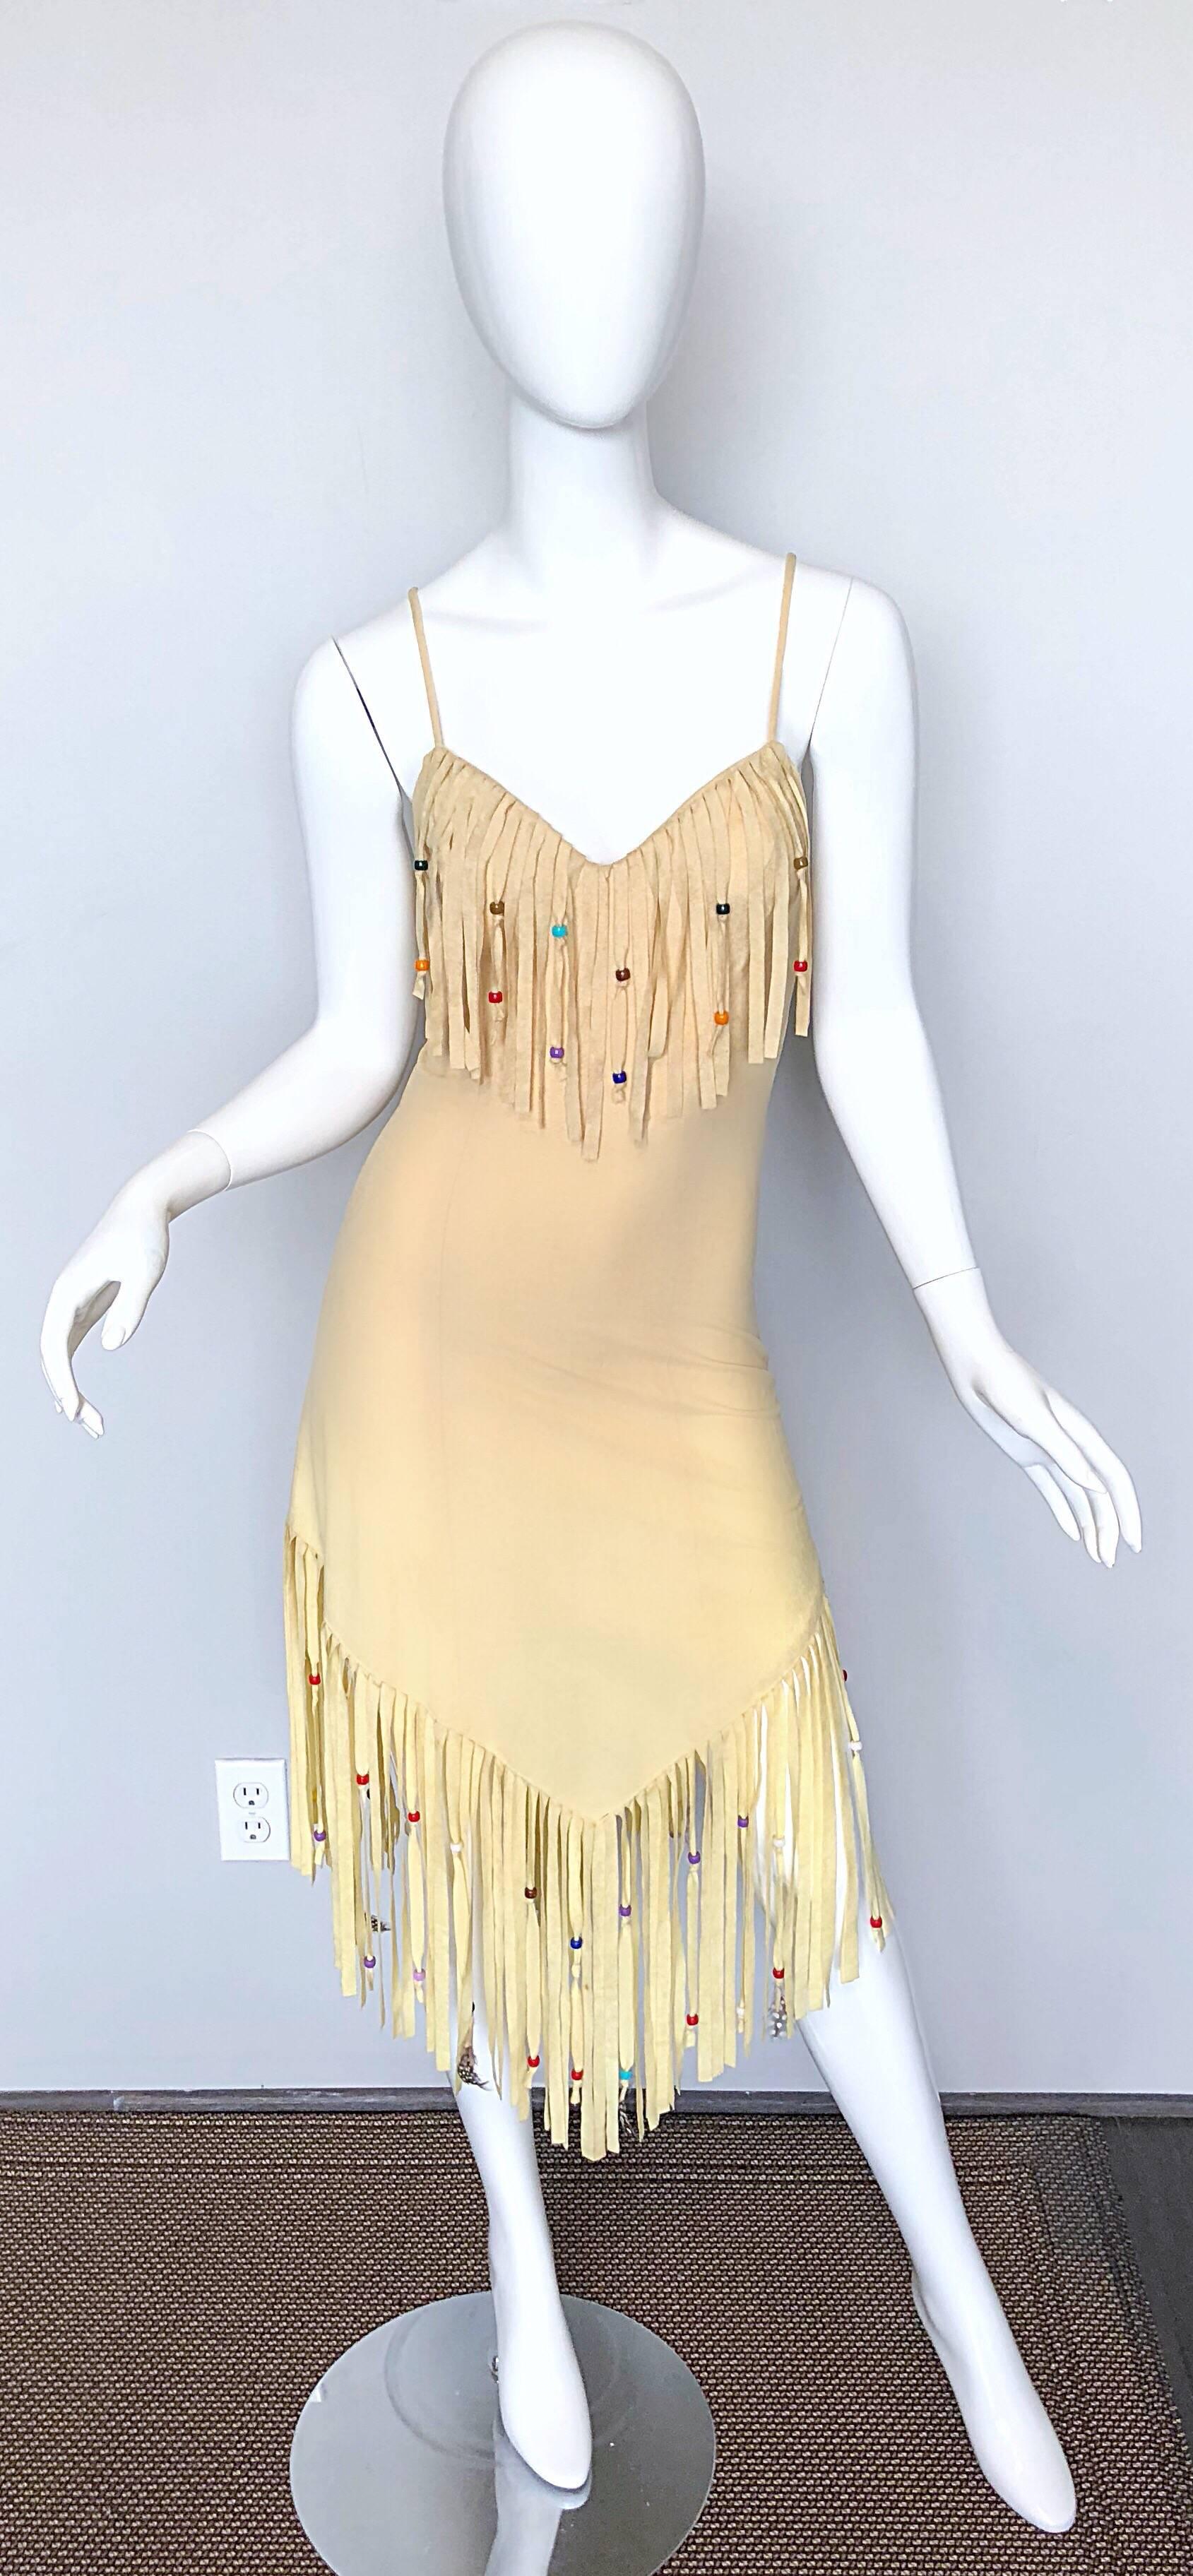 Amazing 70s vintage nude / sand colored faux suede sleeveless feathered and beaded fringed dress! Features colorful plastic beads and feathers sporadically throughout the fringes. Soft lightweight faux suede jersey fabric stretches to fit. Hidden